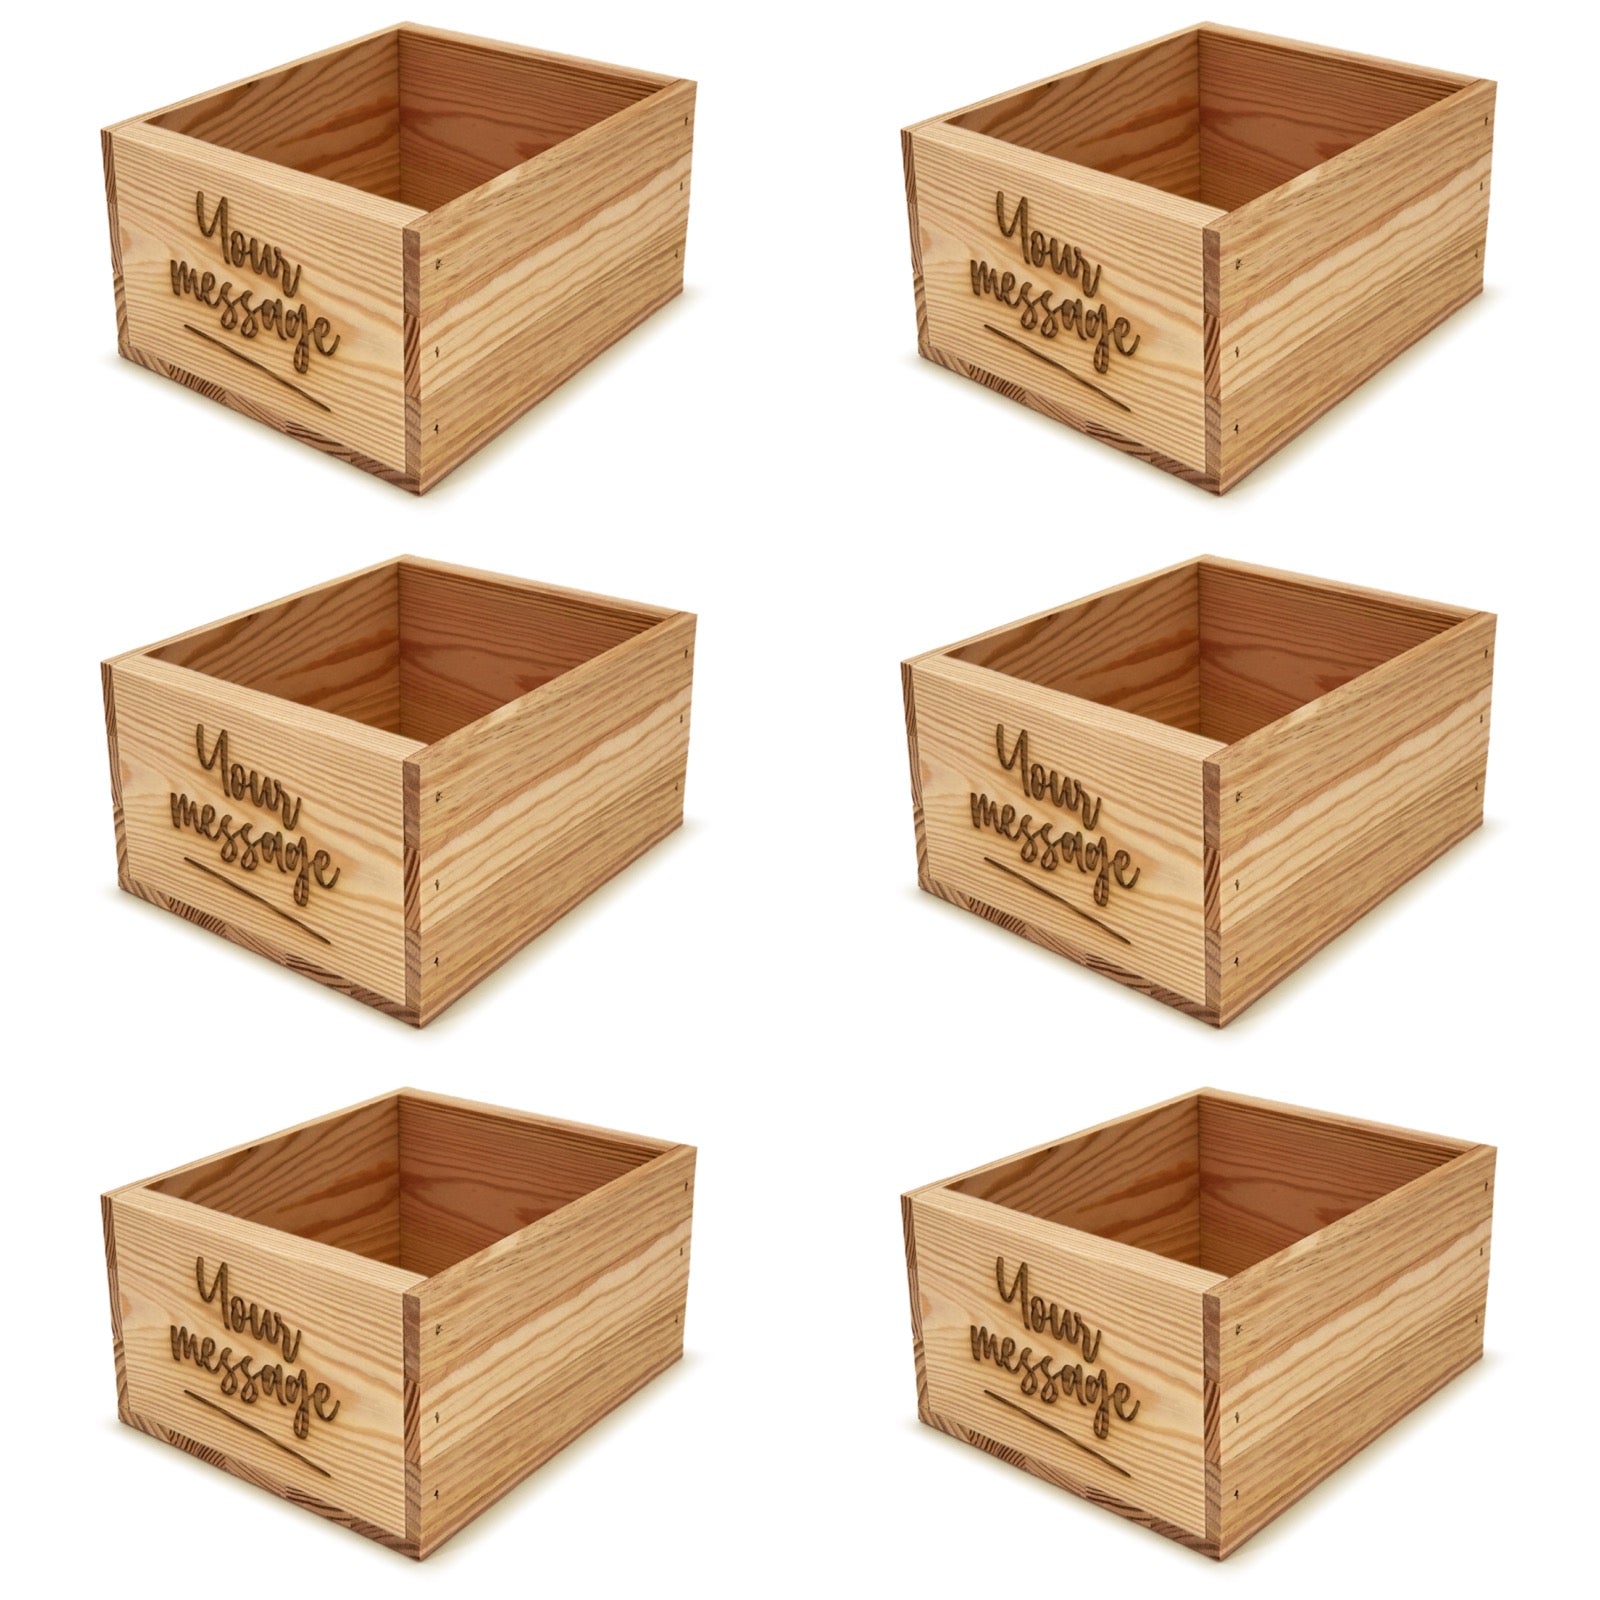 6 Small wooden crates with custom message 9x8x5.25